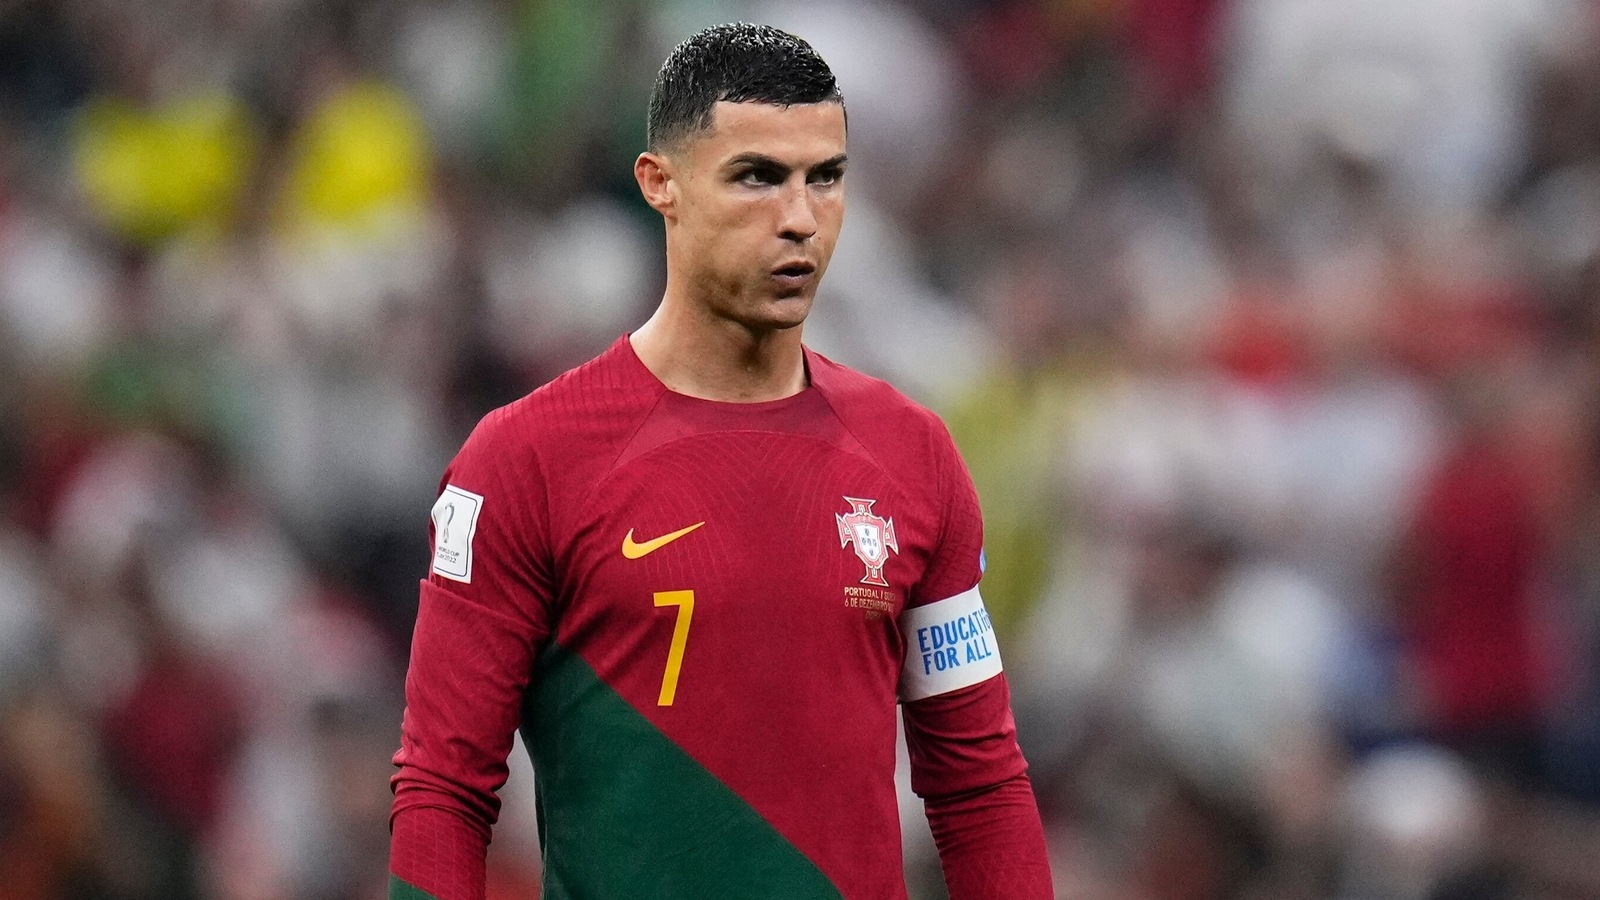 Ronaldo skips training session for substitutes after being benched in Portugal vs Switzerland Round of 16 match: Report